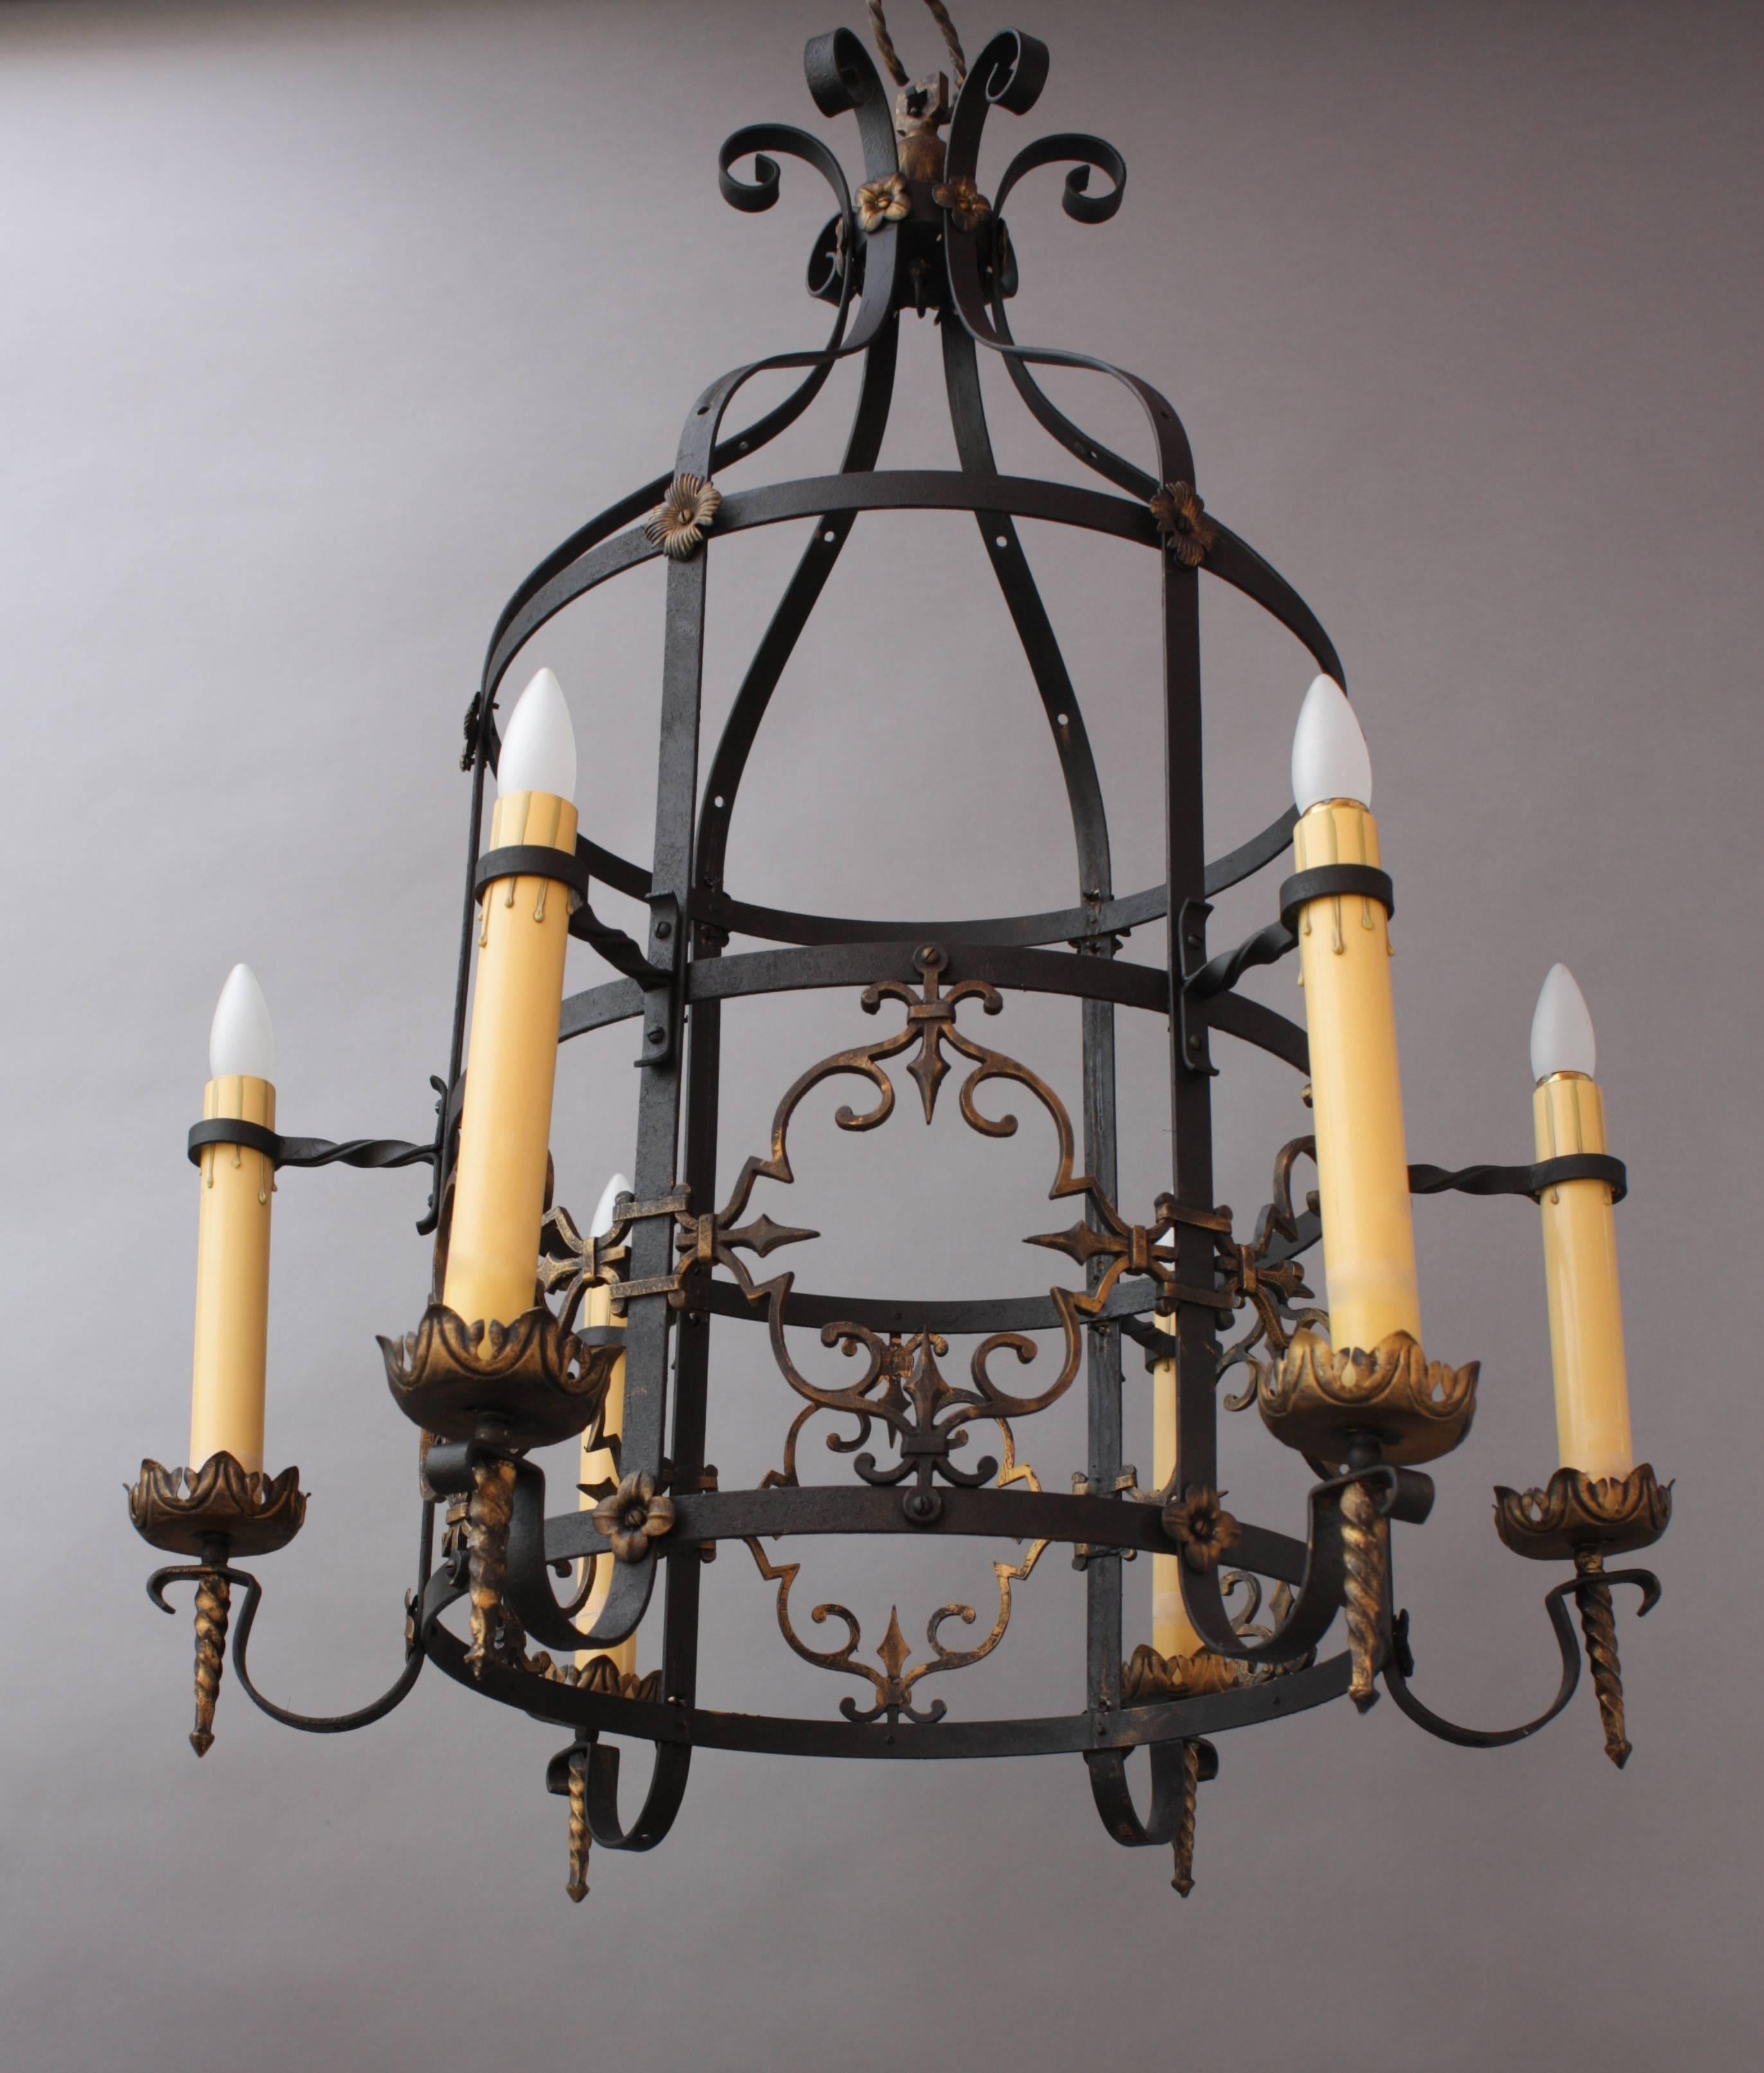 North American Exceptional Spanish Revival Large-Scale Bronze and Iron Chandelier